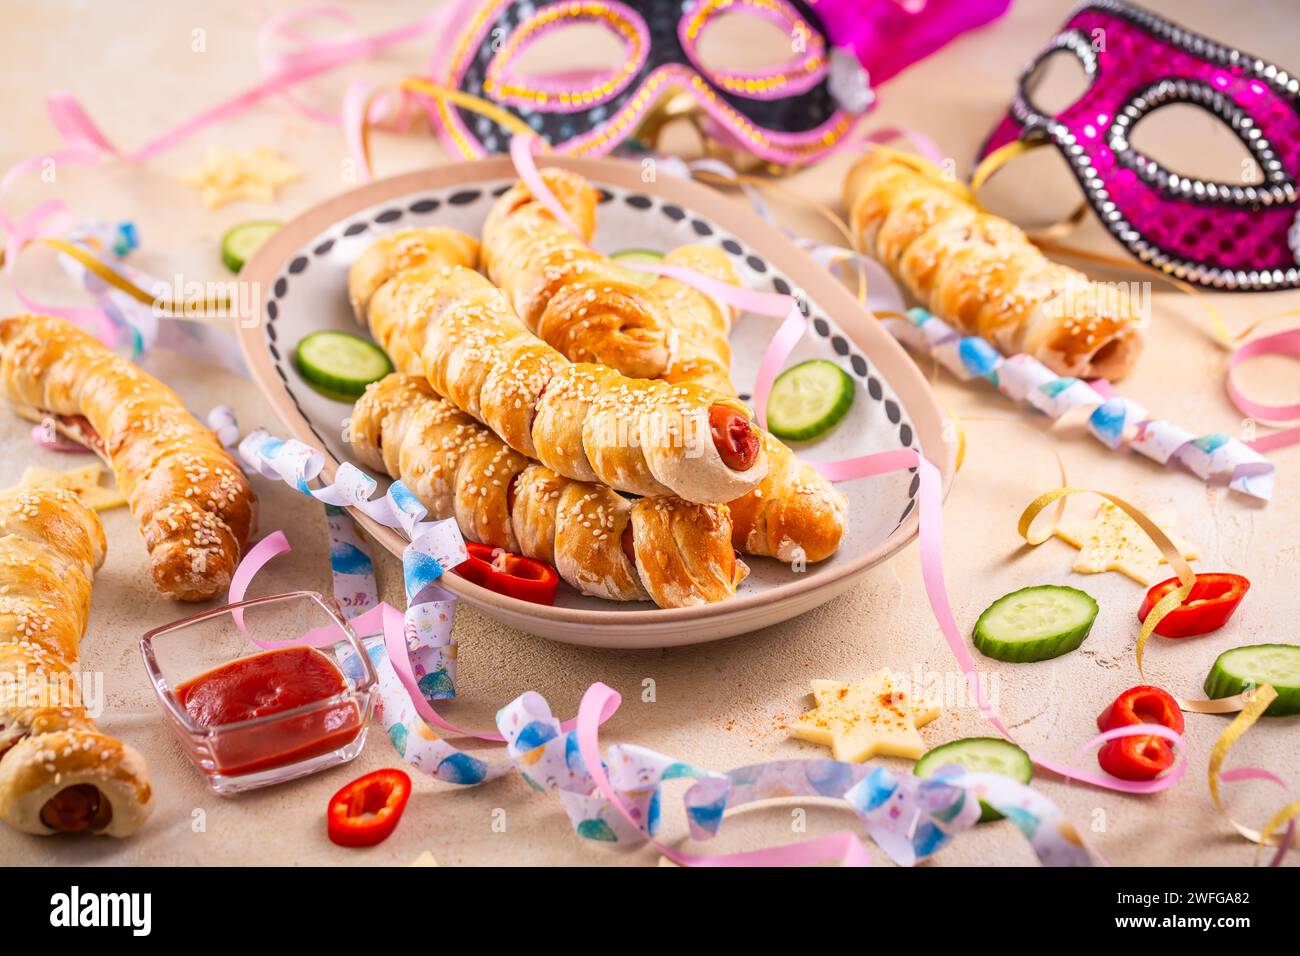 Pig in blanket, long sausages wrapped in yeast dough - traditional carnival, Fasching and party food Stock Photo